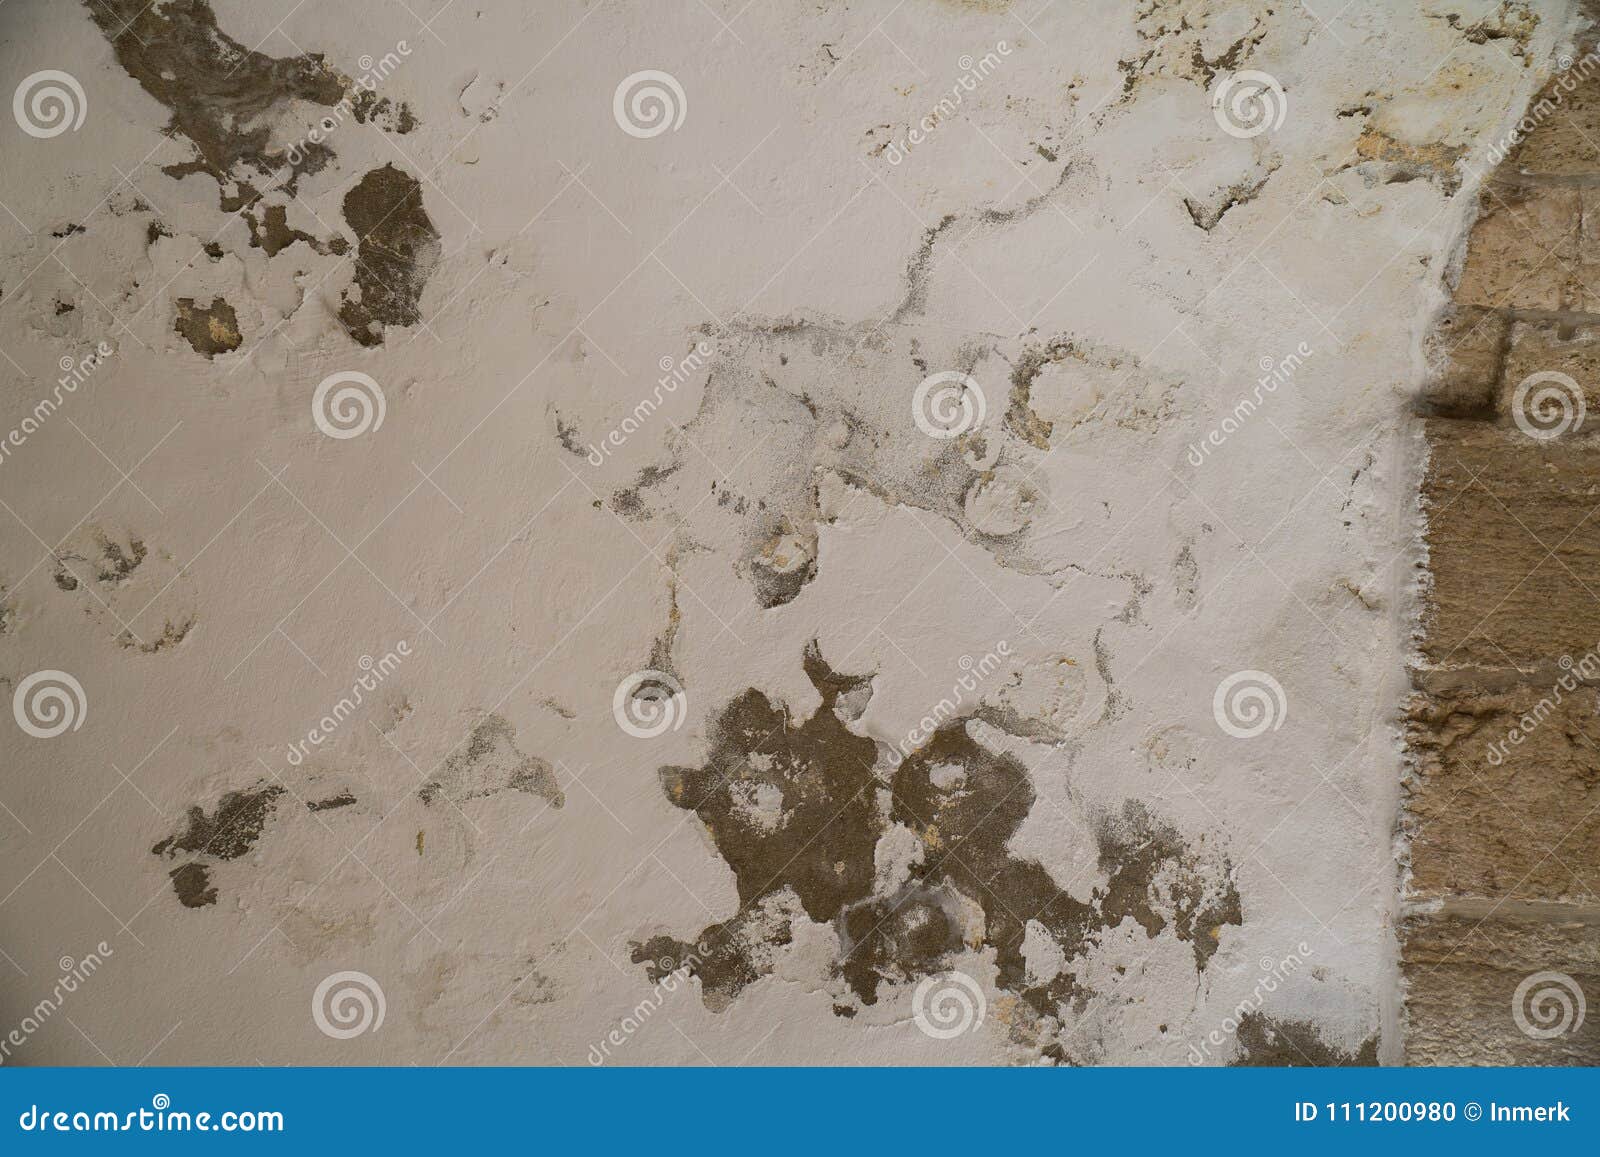 water damages and mold on the ceiling in the mamluks on the temple mount in jerusalem